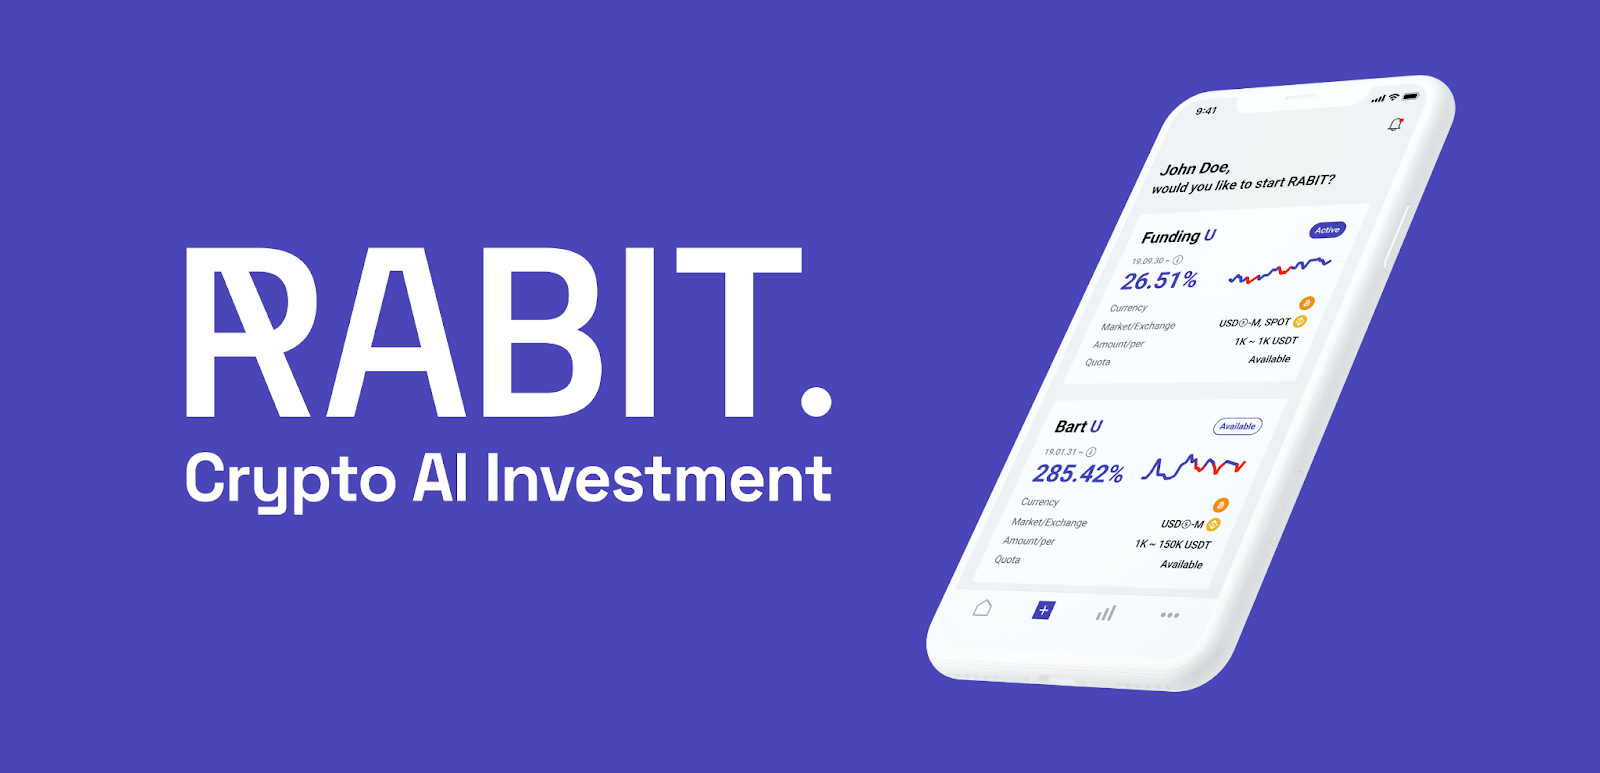 Quantit launches 'RABIT', an official version of a crypto-focused robo-advisor